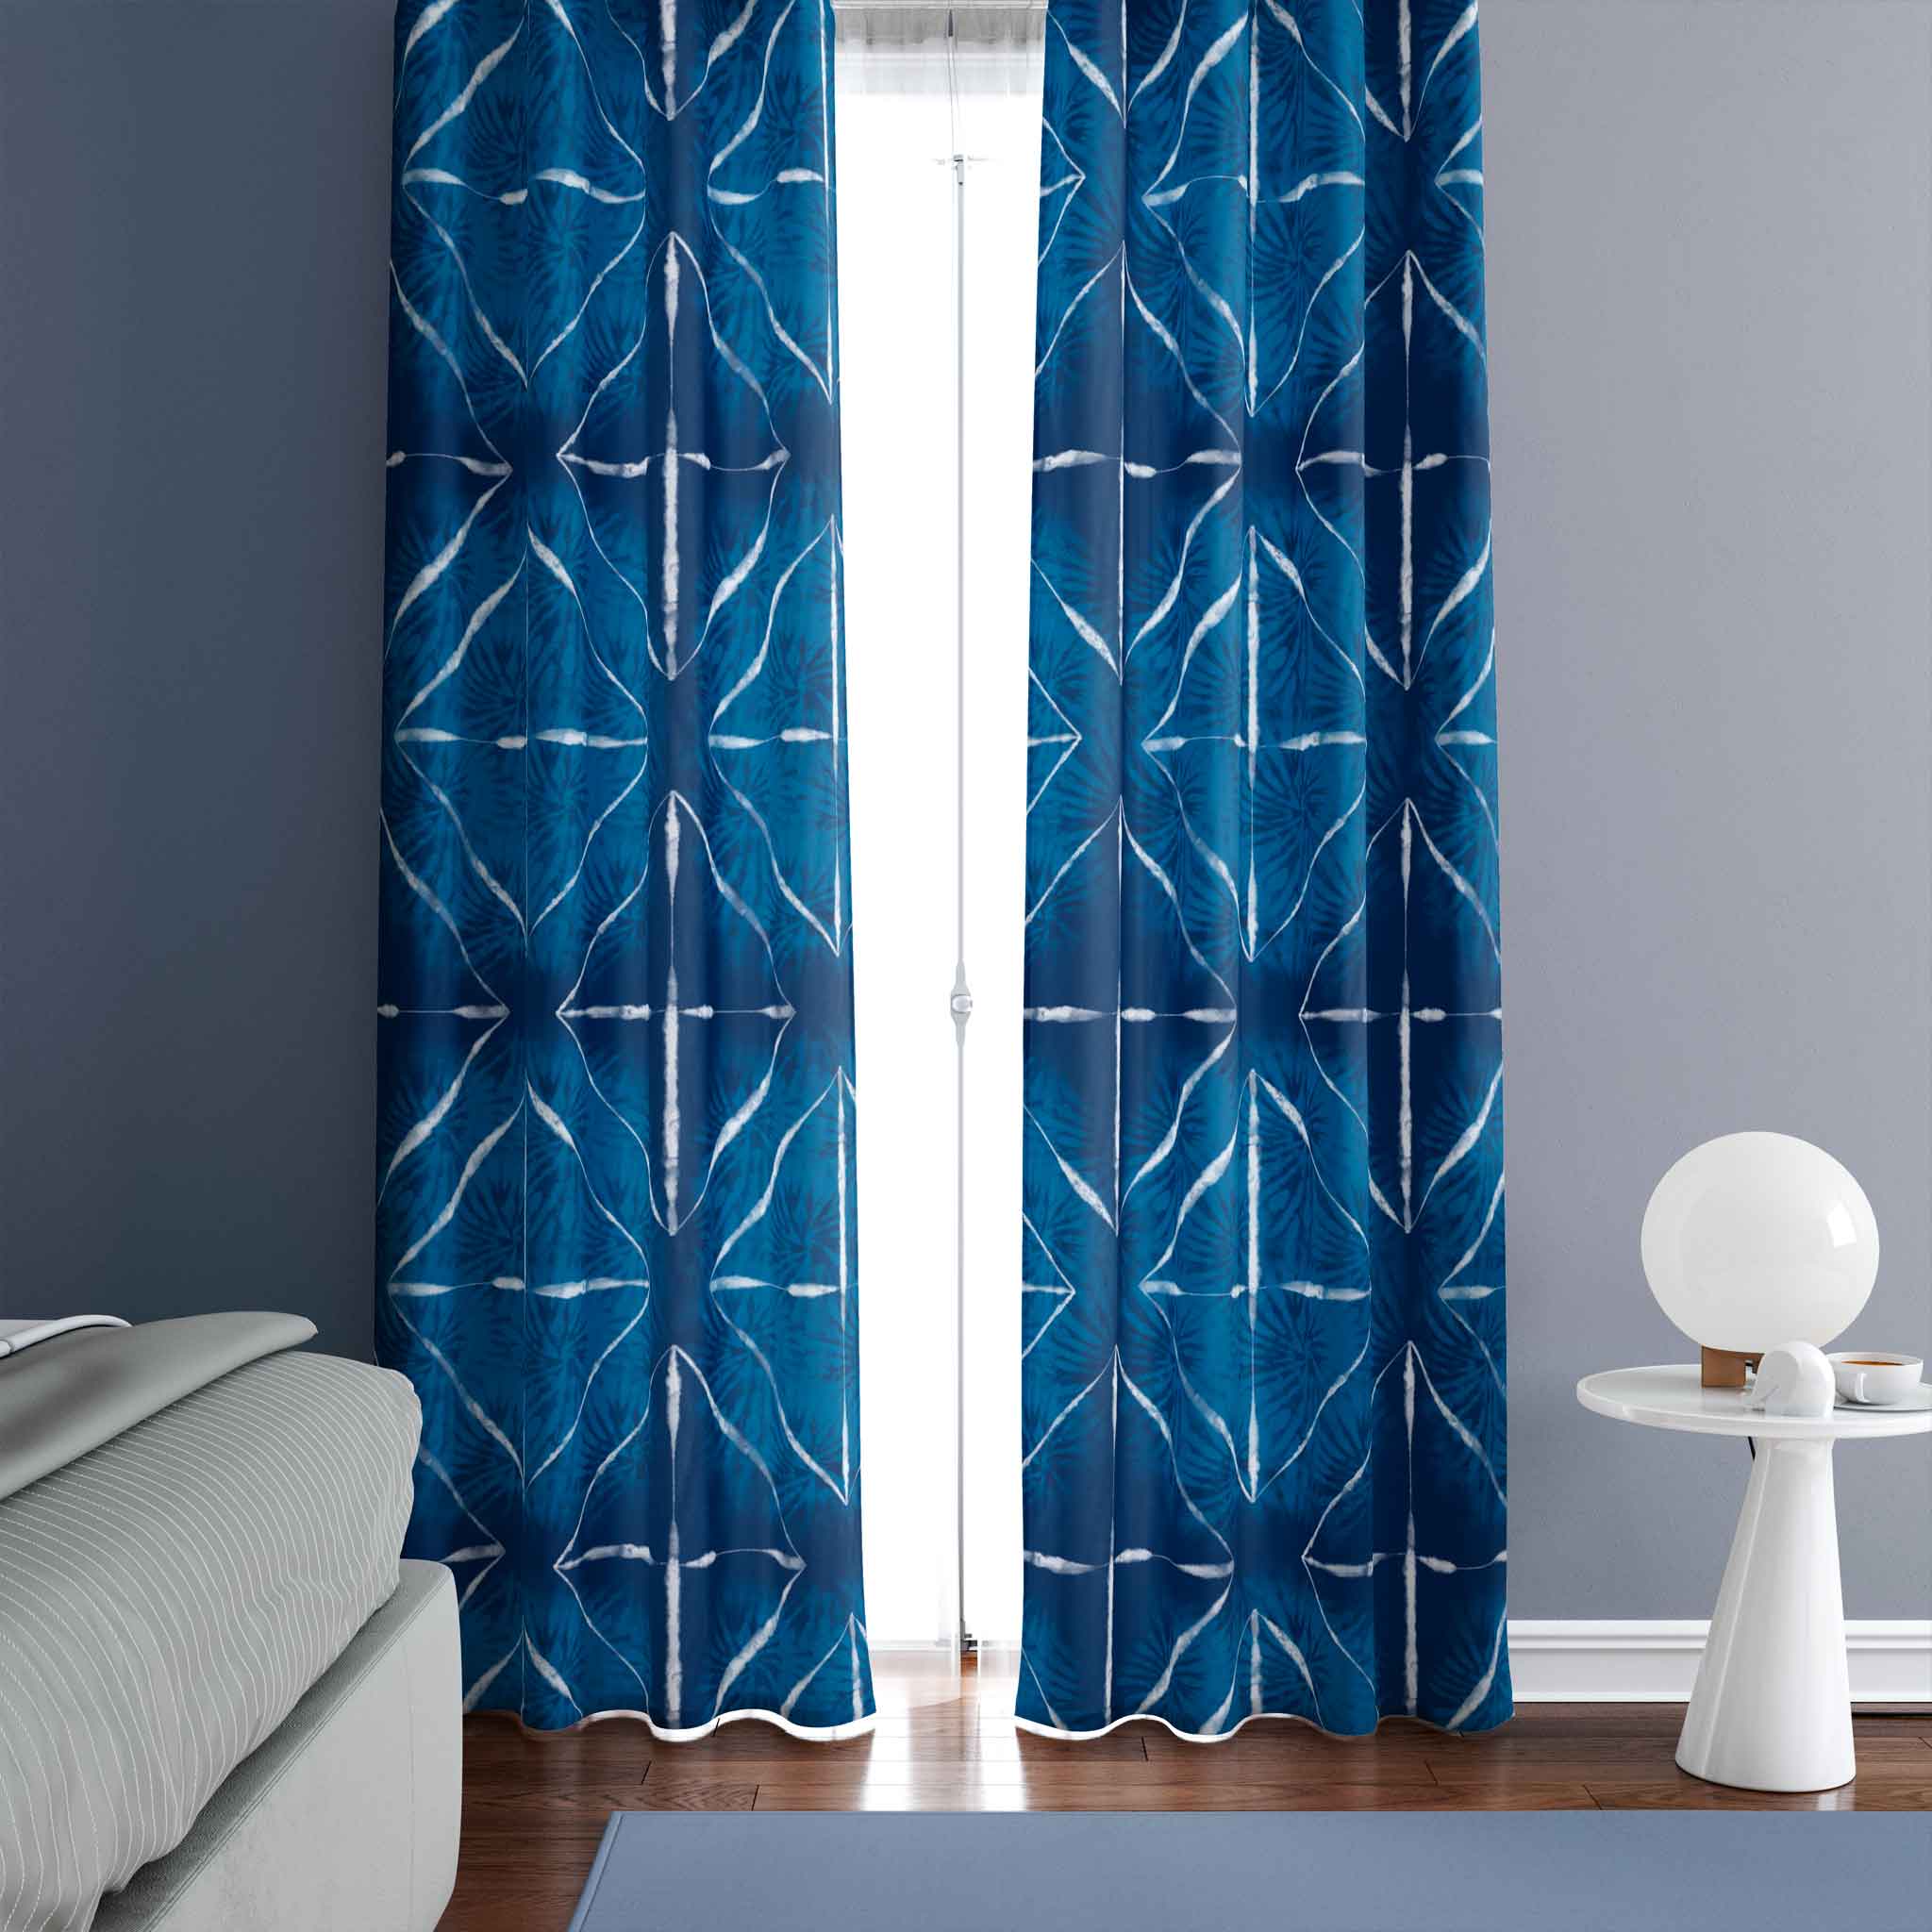 50 inch wide tie dye patterned curtains extra large diamond on indigo blue background. Order two to complete a window-scape.